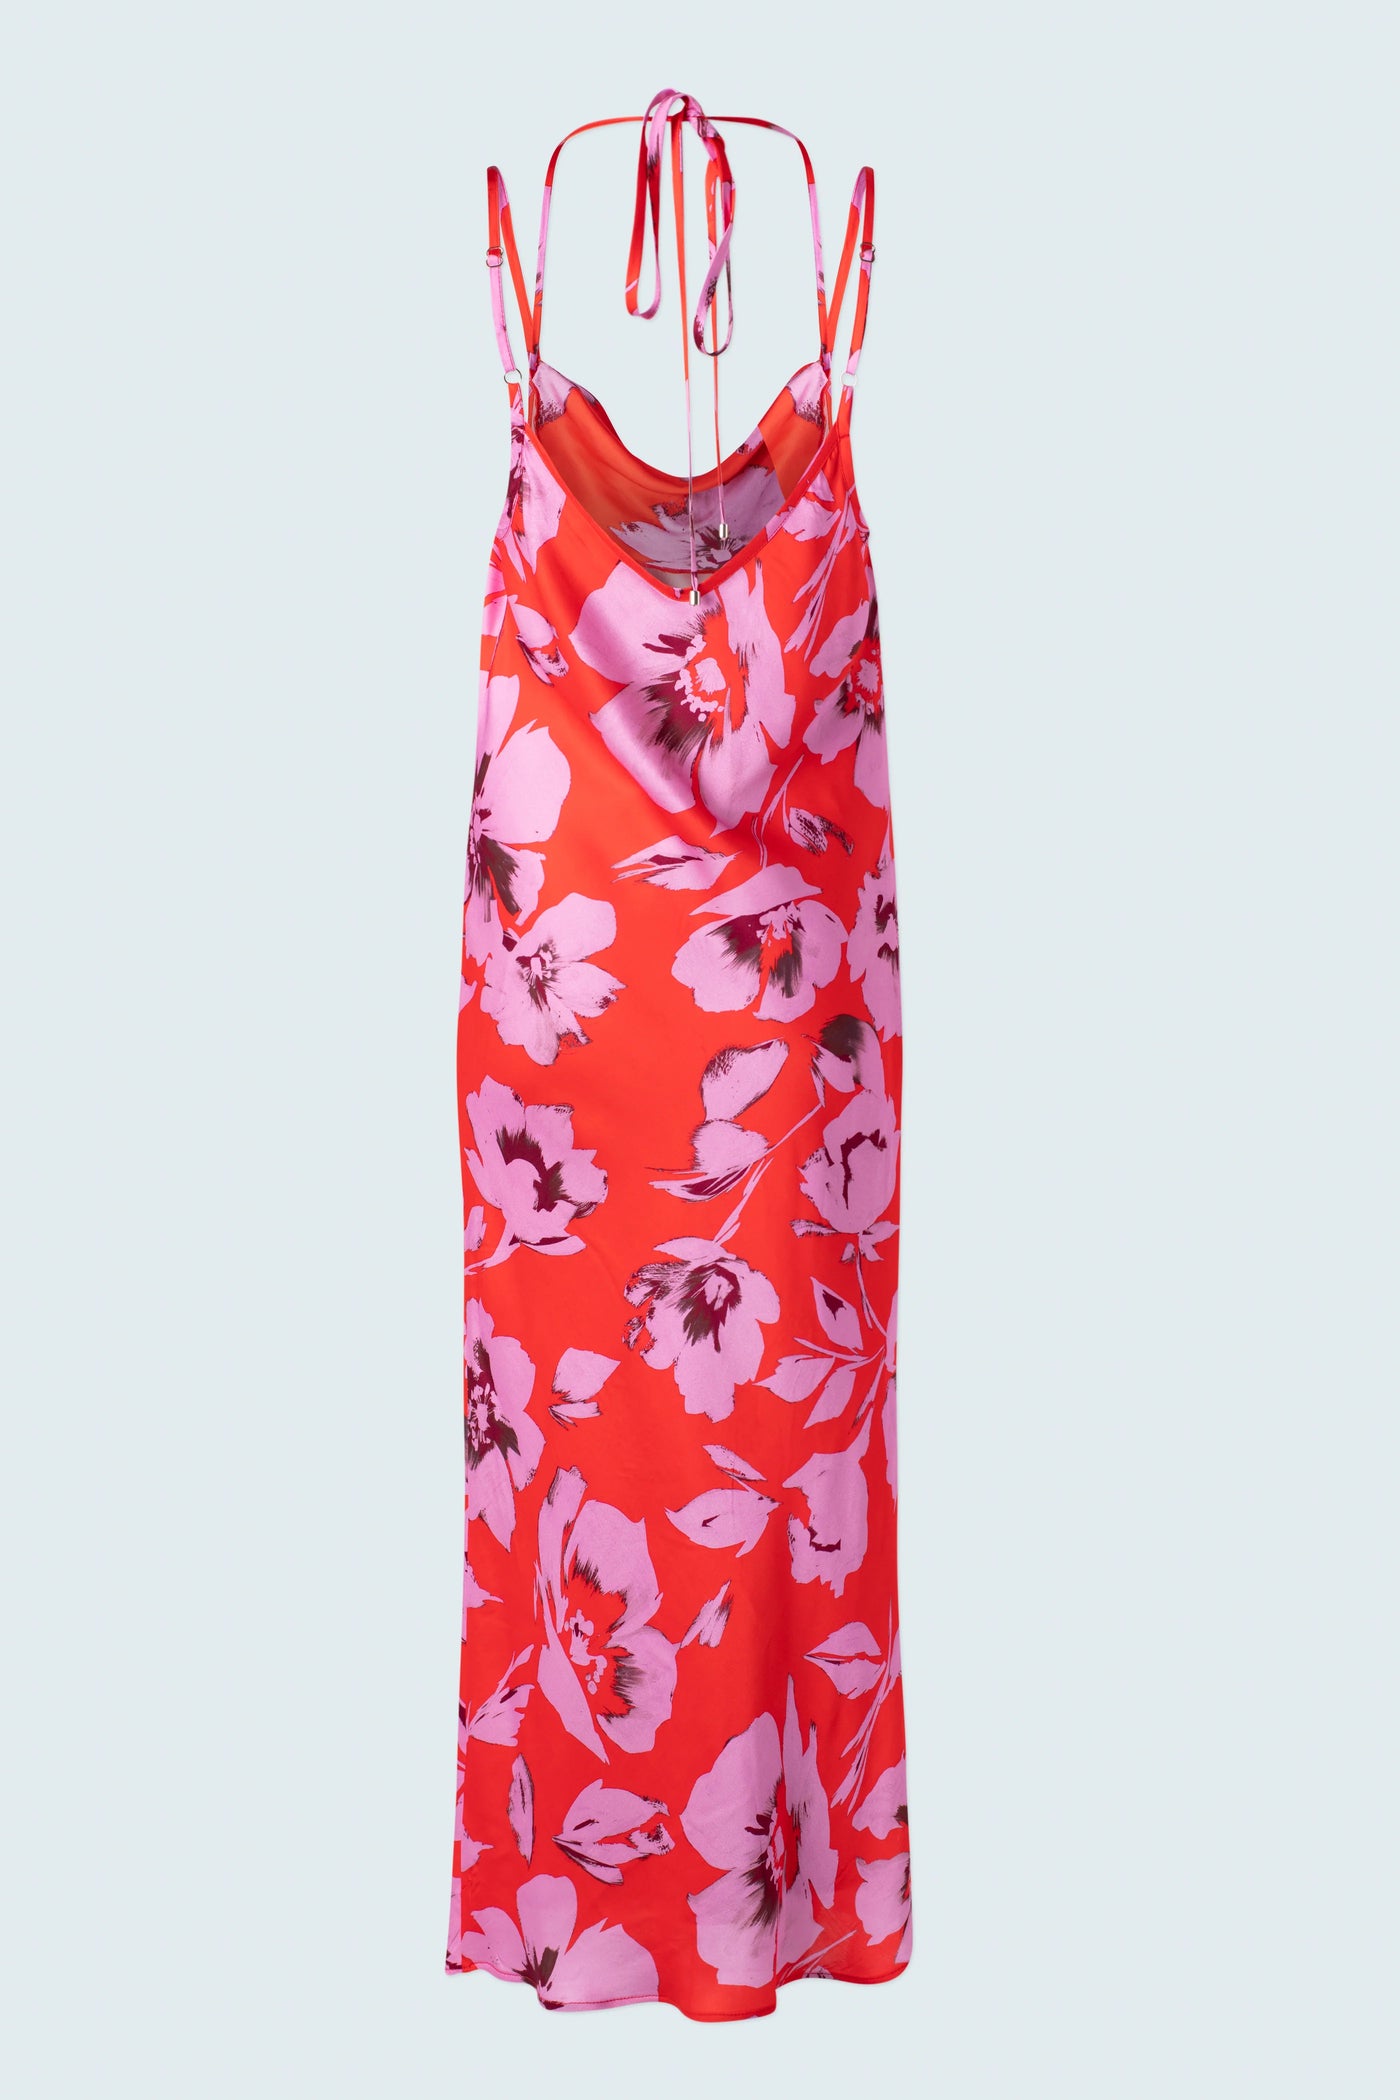 Printed Slip Dress with Cowl Neck in Satin Pink Floral